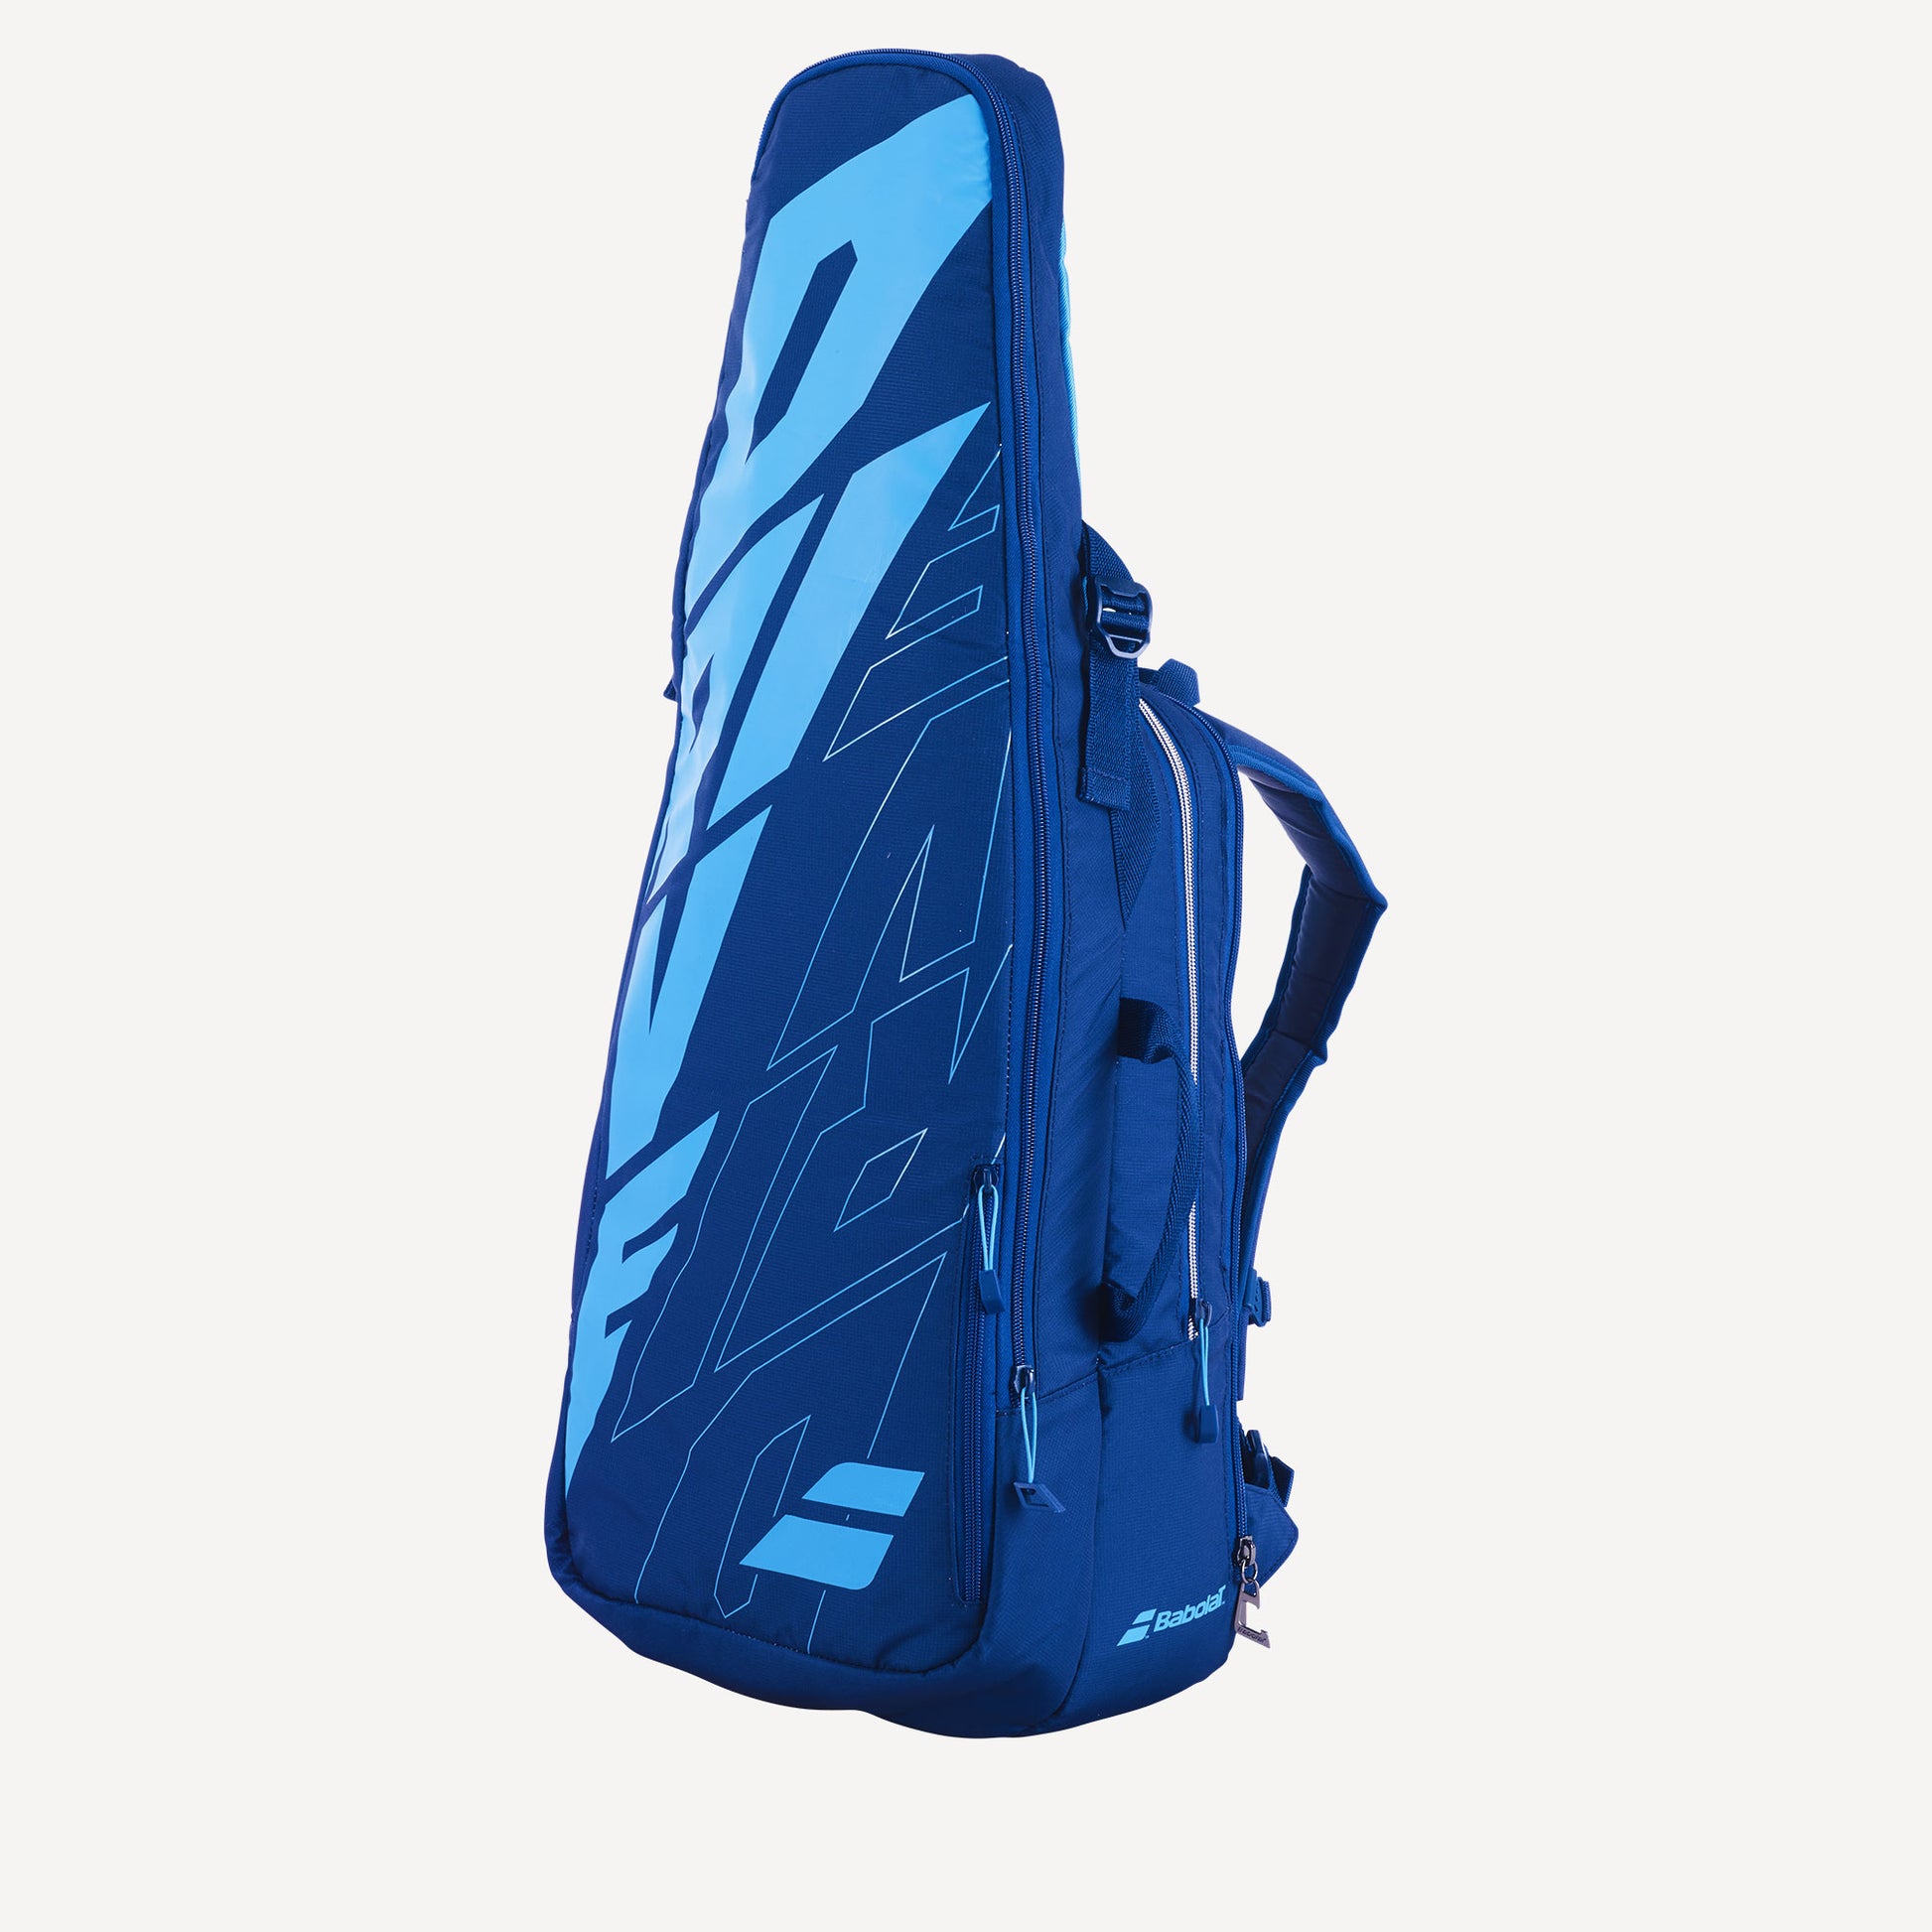 Babolat Pure Drive Tennis Backpack Blue (2)